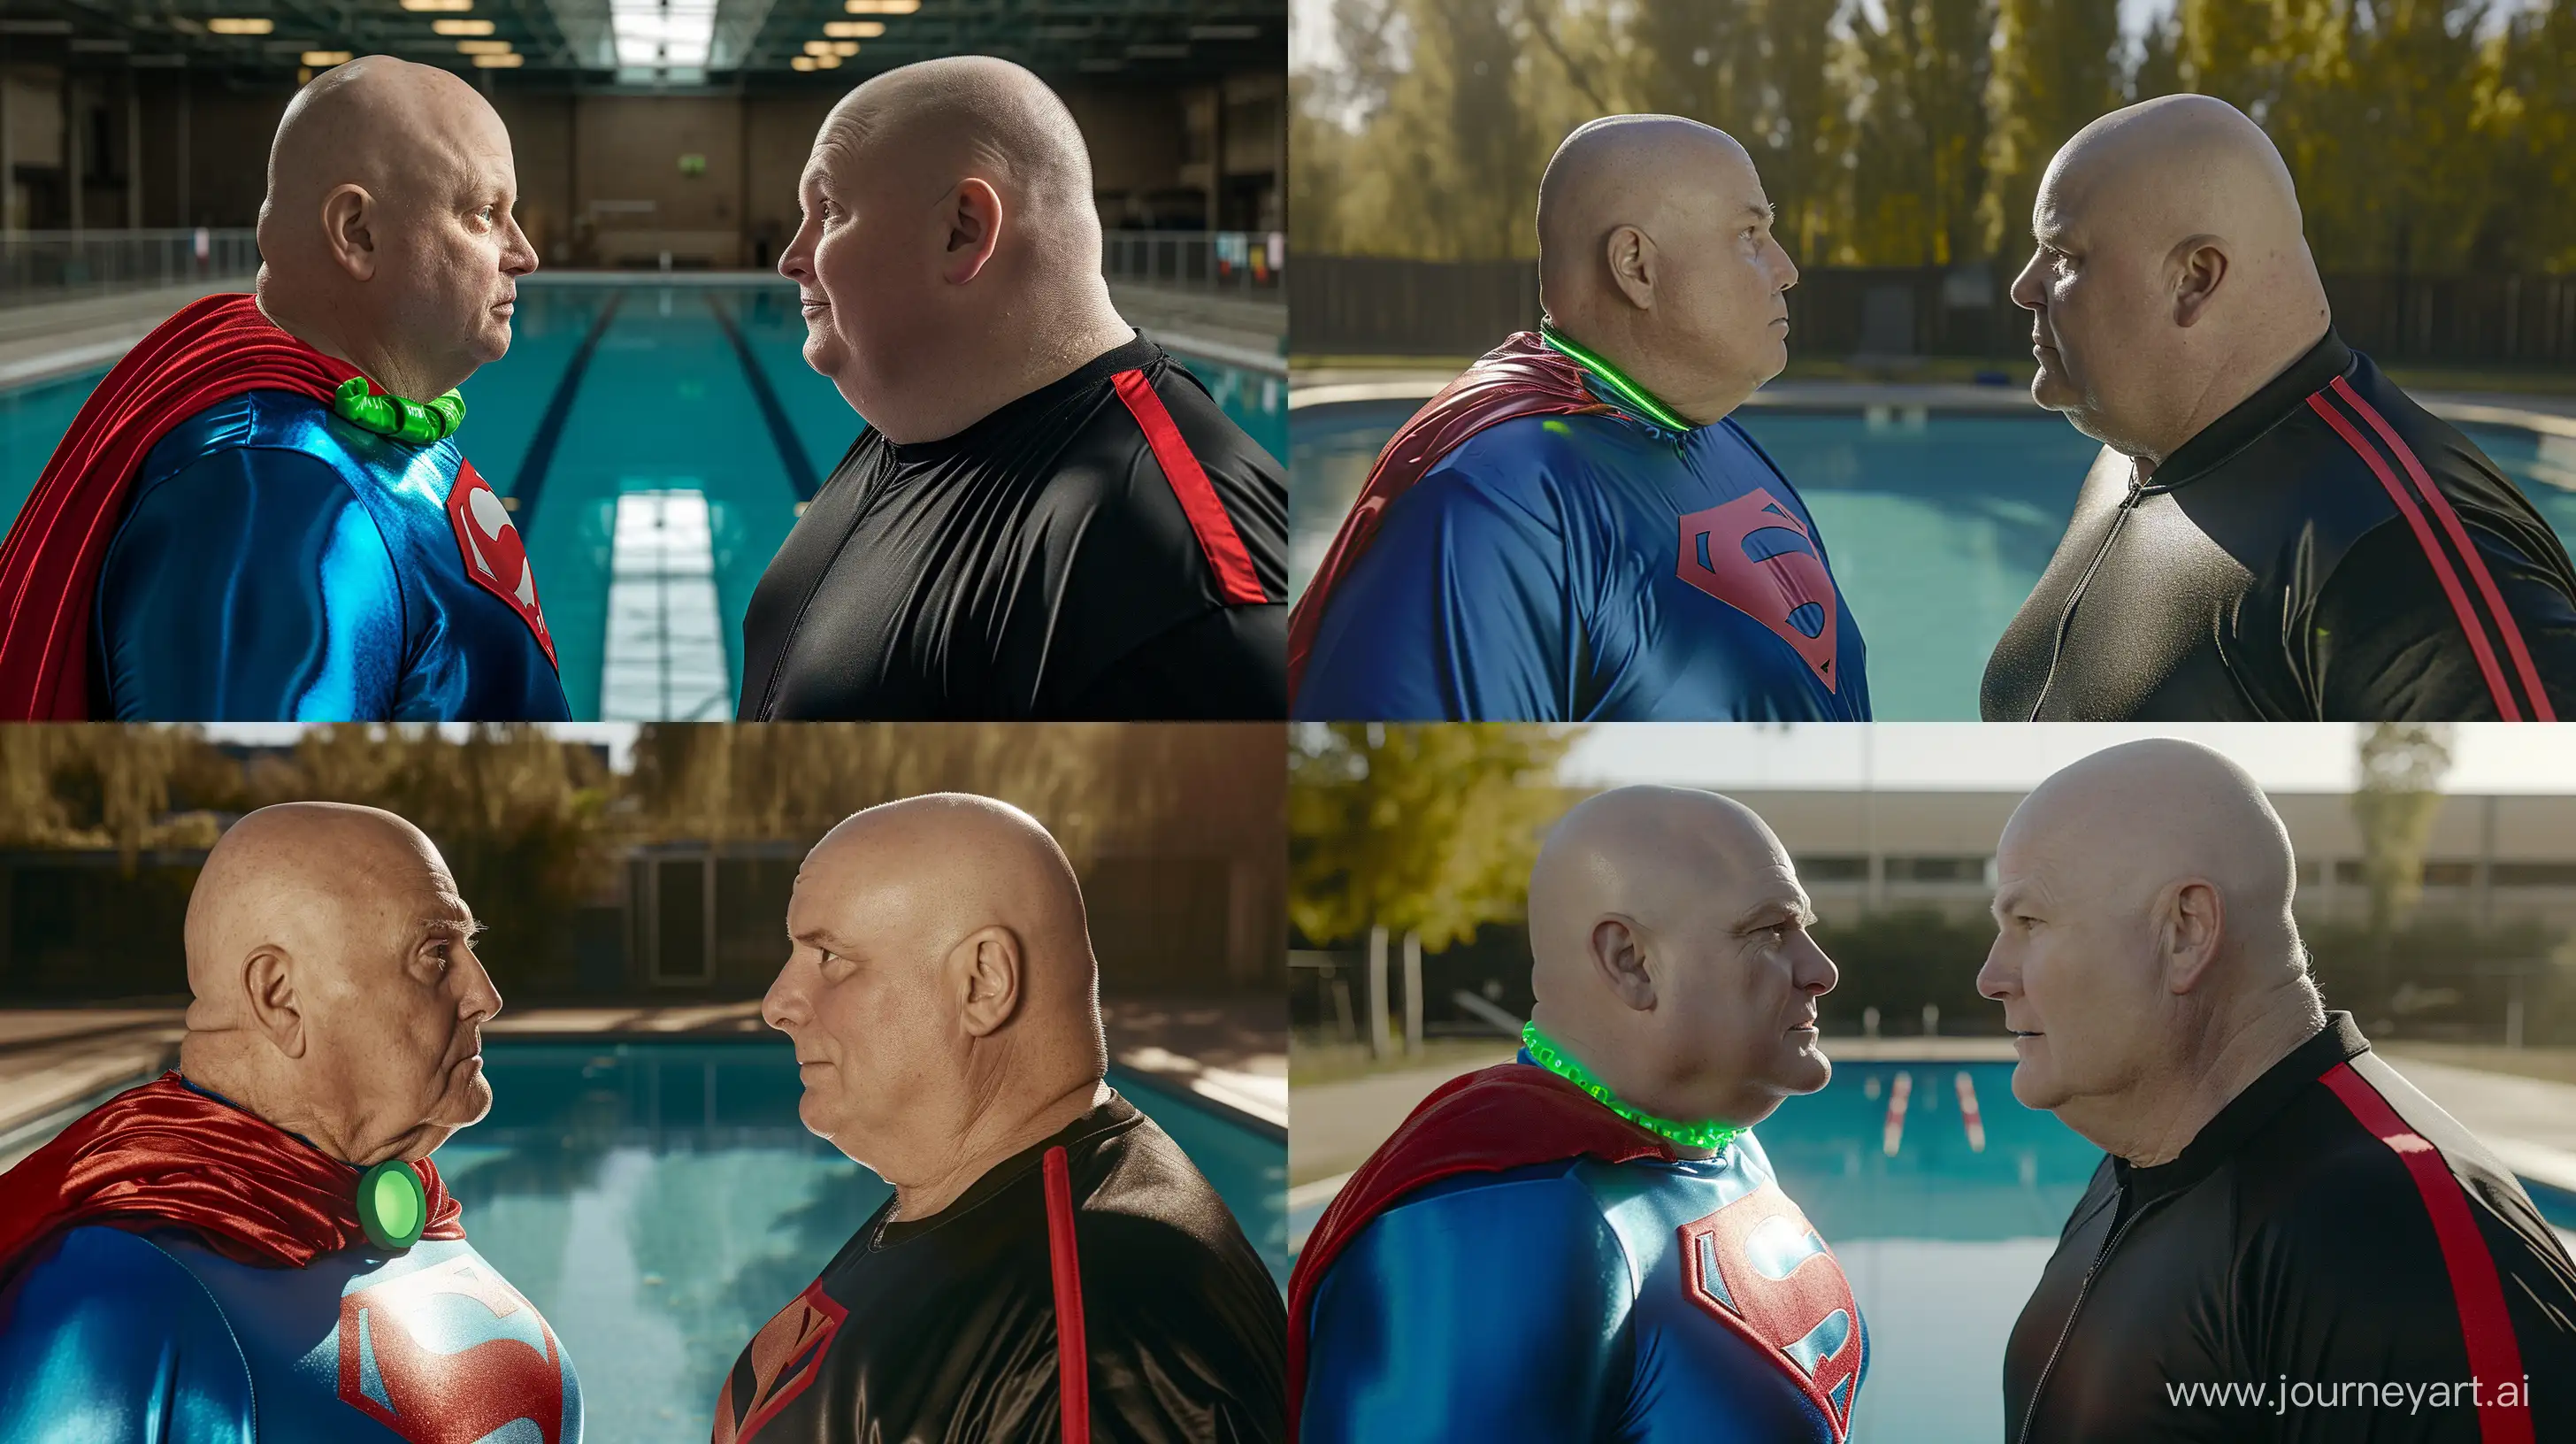 Closeup portrait photo of two men facing each other. The man on the right is a chubby man aged 60 wearing a silky black tracksuit with a red stripe. The man on the left is a chubby man aged 60 wearing a blue silky superman costume with a large red cape and a green glowing small short dog collar. Swimming Pool. Natural Light. Bald. Clean Shaven. --style raw --ar 16:9 --v 6